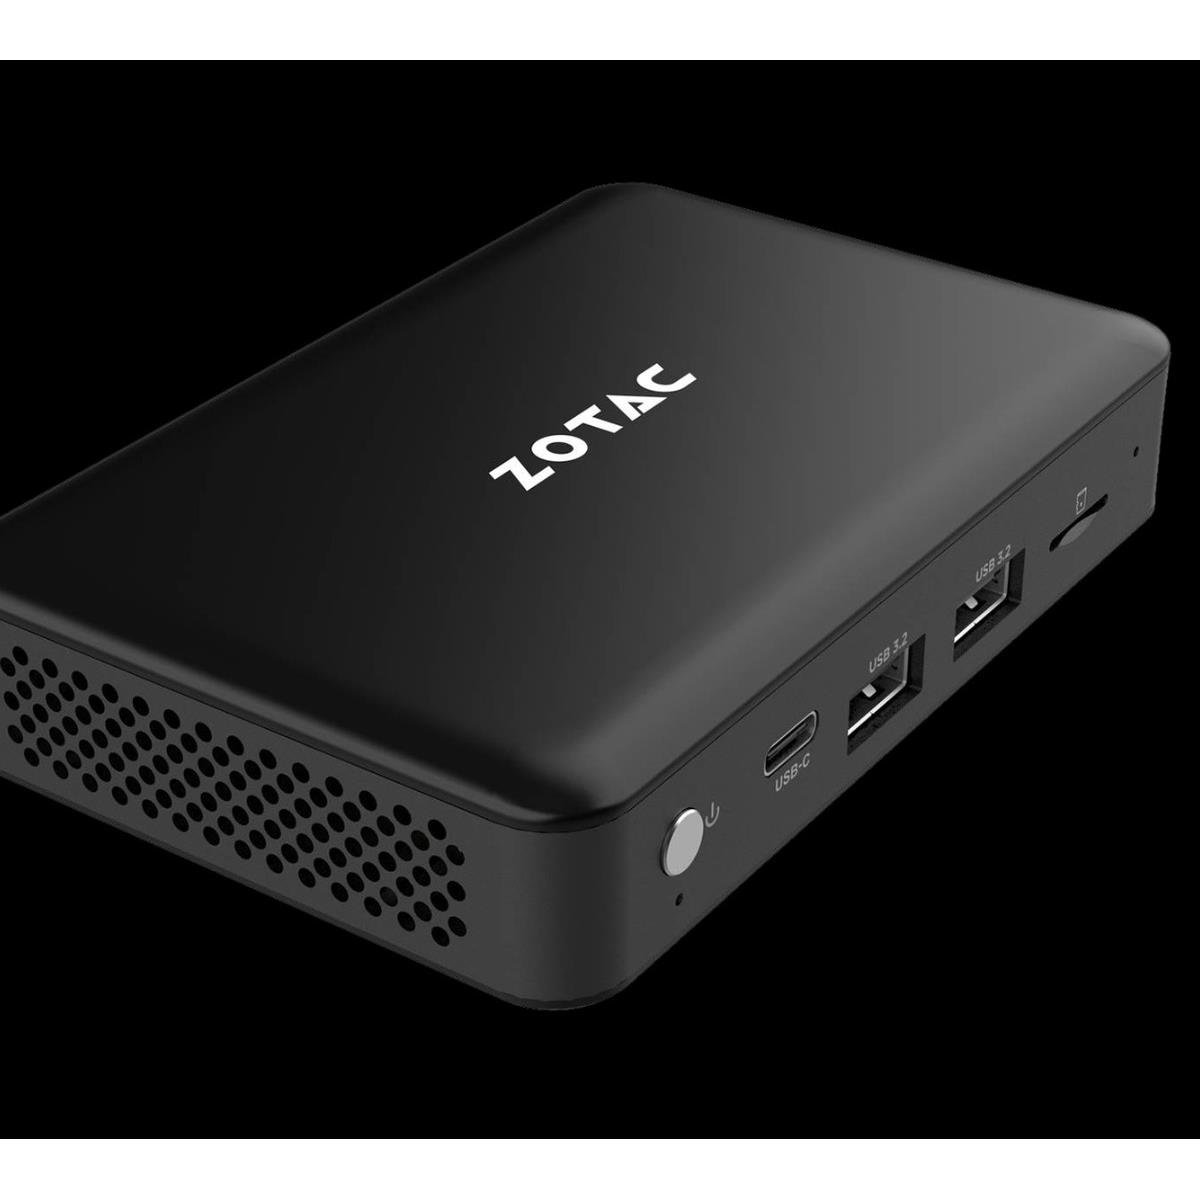 Zotac's Latest ZBOX With AirJet Is The First-Ever Mini PC To Sport 